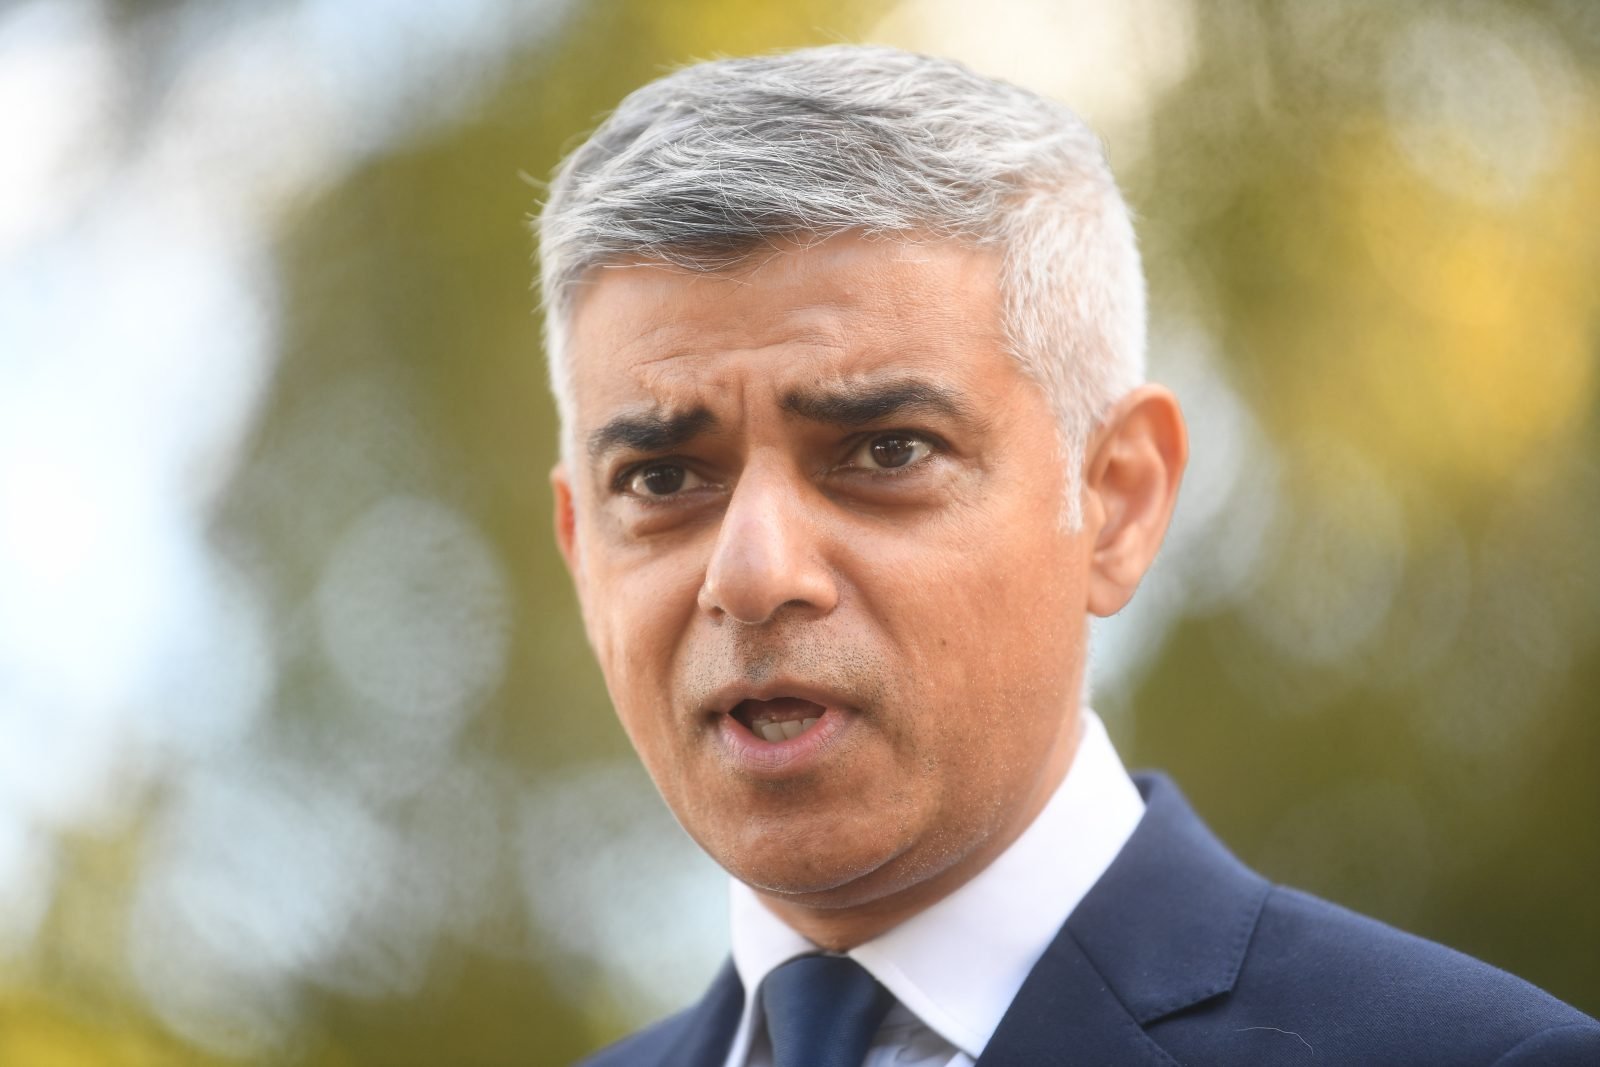 Sadiq Khan: London's hard-hit businesses need more support in Tier 3